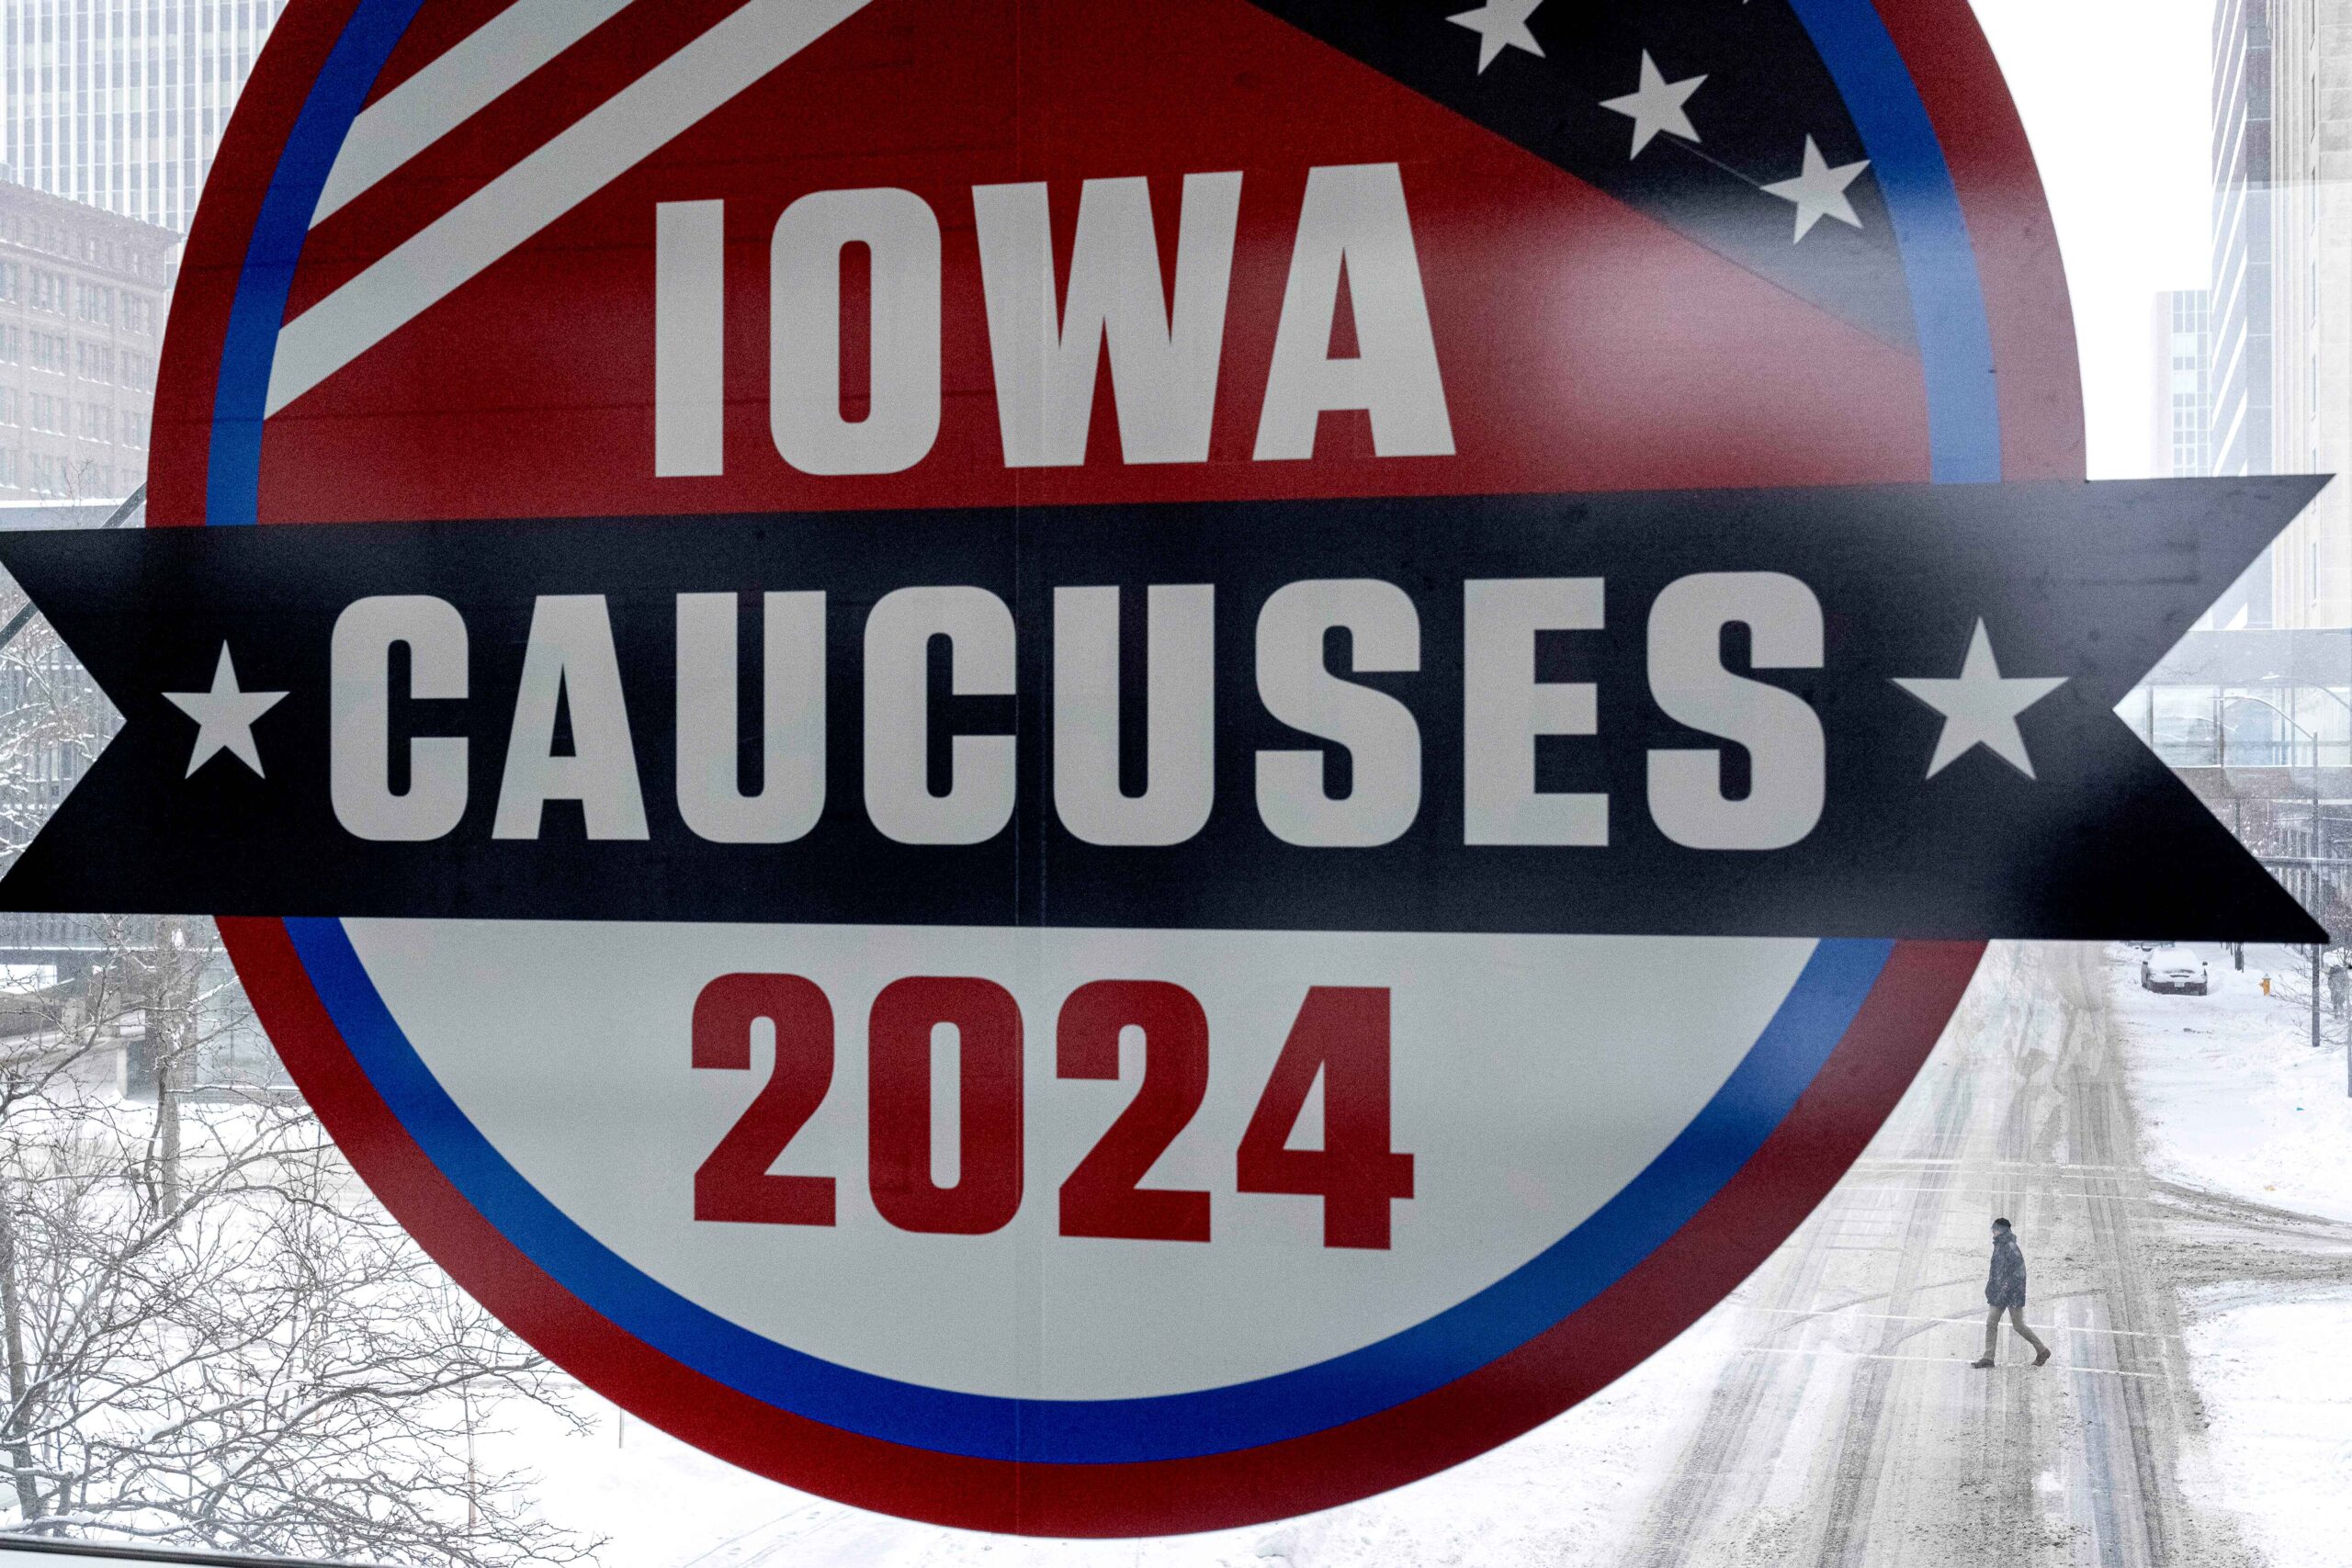 Nearly two-thirds of Iowa Republicans reject the idea that Joe Biden won the 2020 election legitimately, entrance polls at the Iowa Caucuses indicate. (AP Photo/Andrew Harnik)